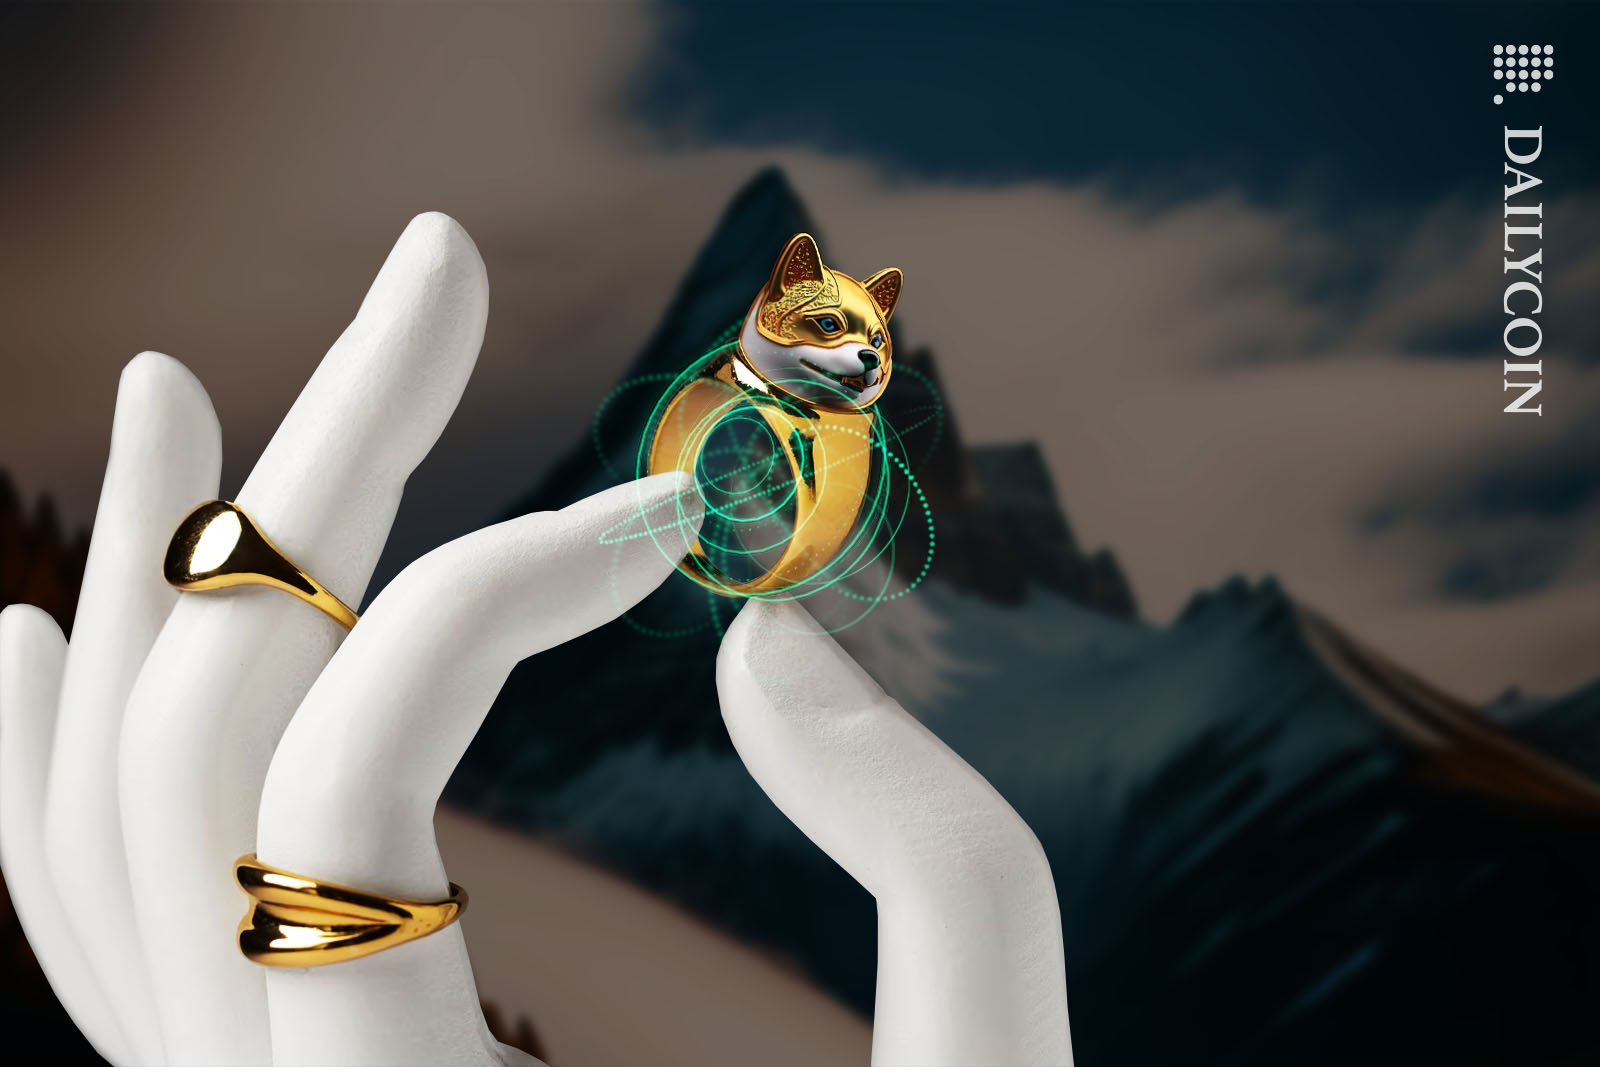 White manequin hand holding up a golden Shiba Inu ring.